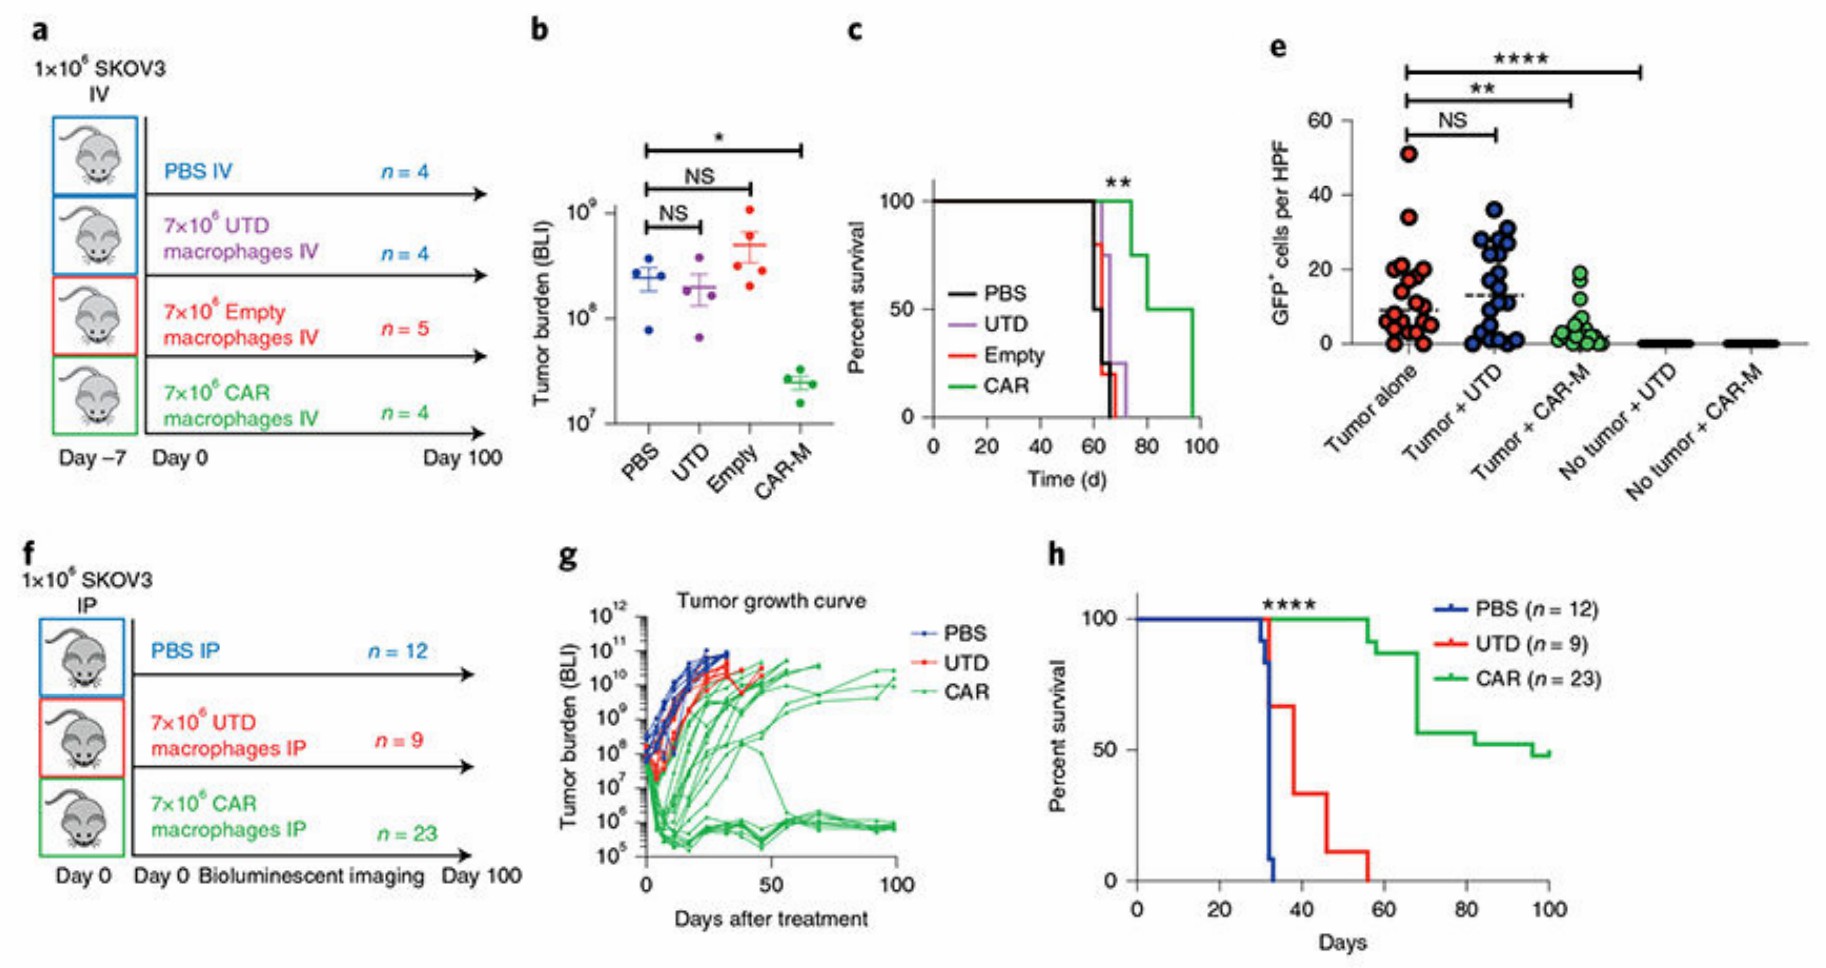 Anti-HER2 CAR-MA reduced tumor burden in mice and prolonged survival time. (Klichinsky, et al., 2020)